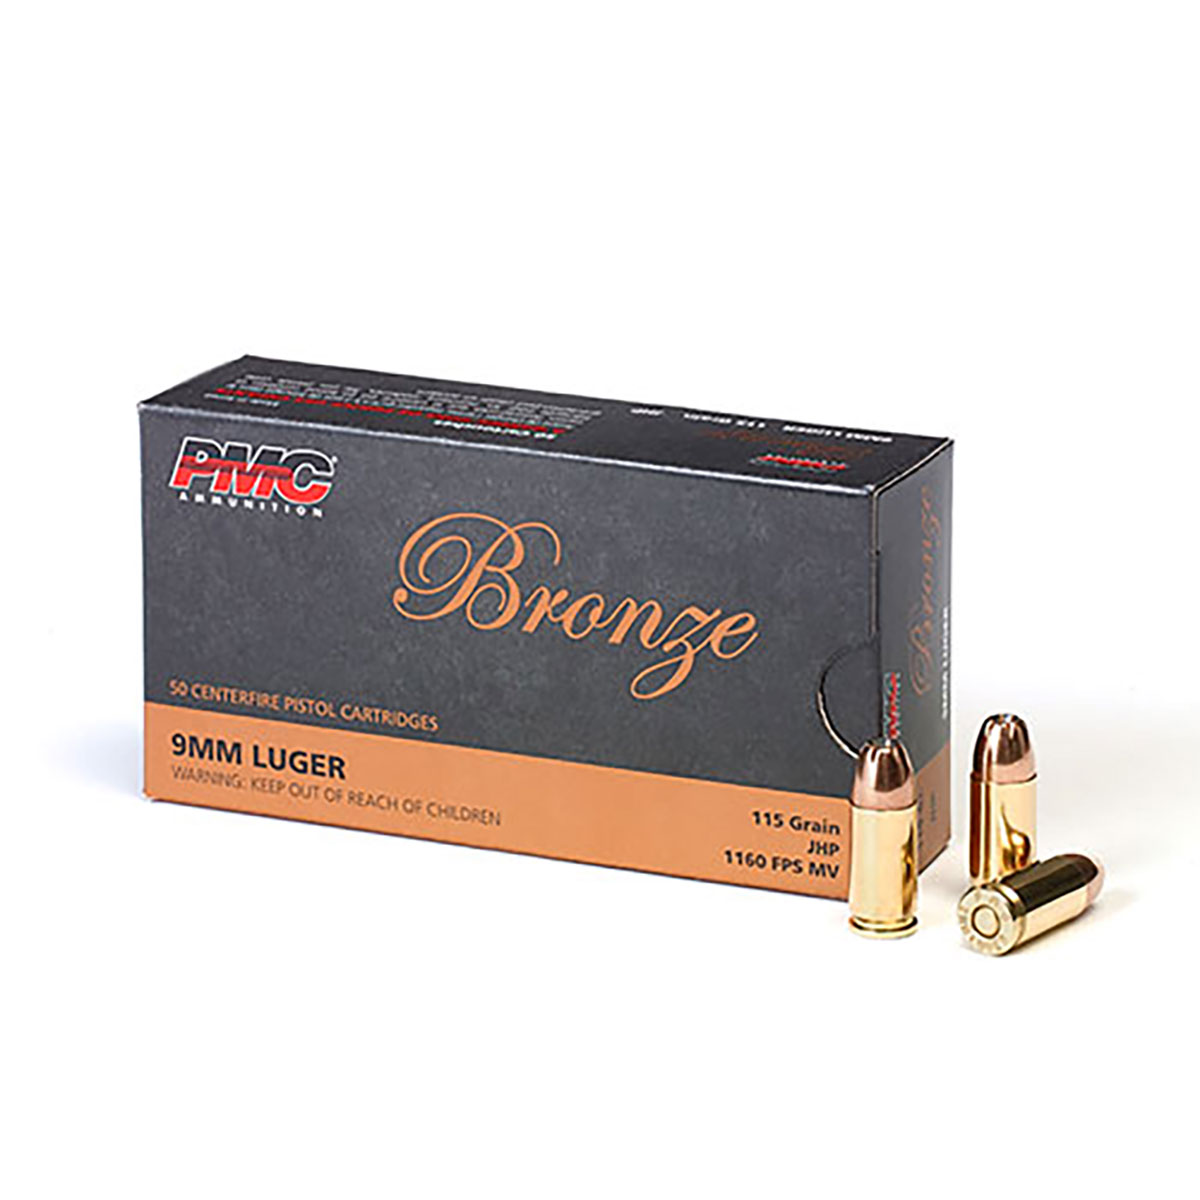 PMC AMMUNITION, INC. - 9MM LUGER 115GR JACKETED HOLLOW POINT 50/BOX